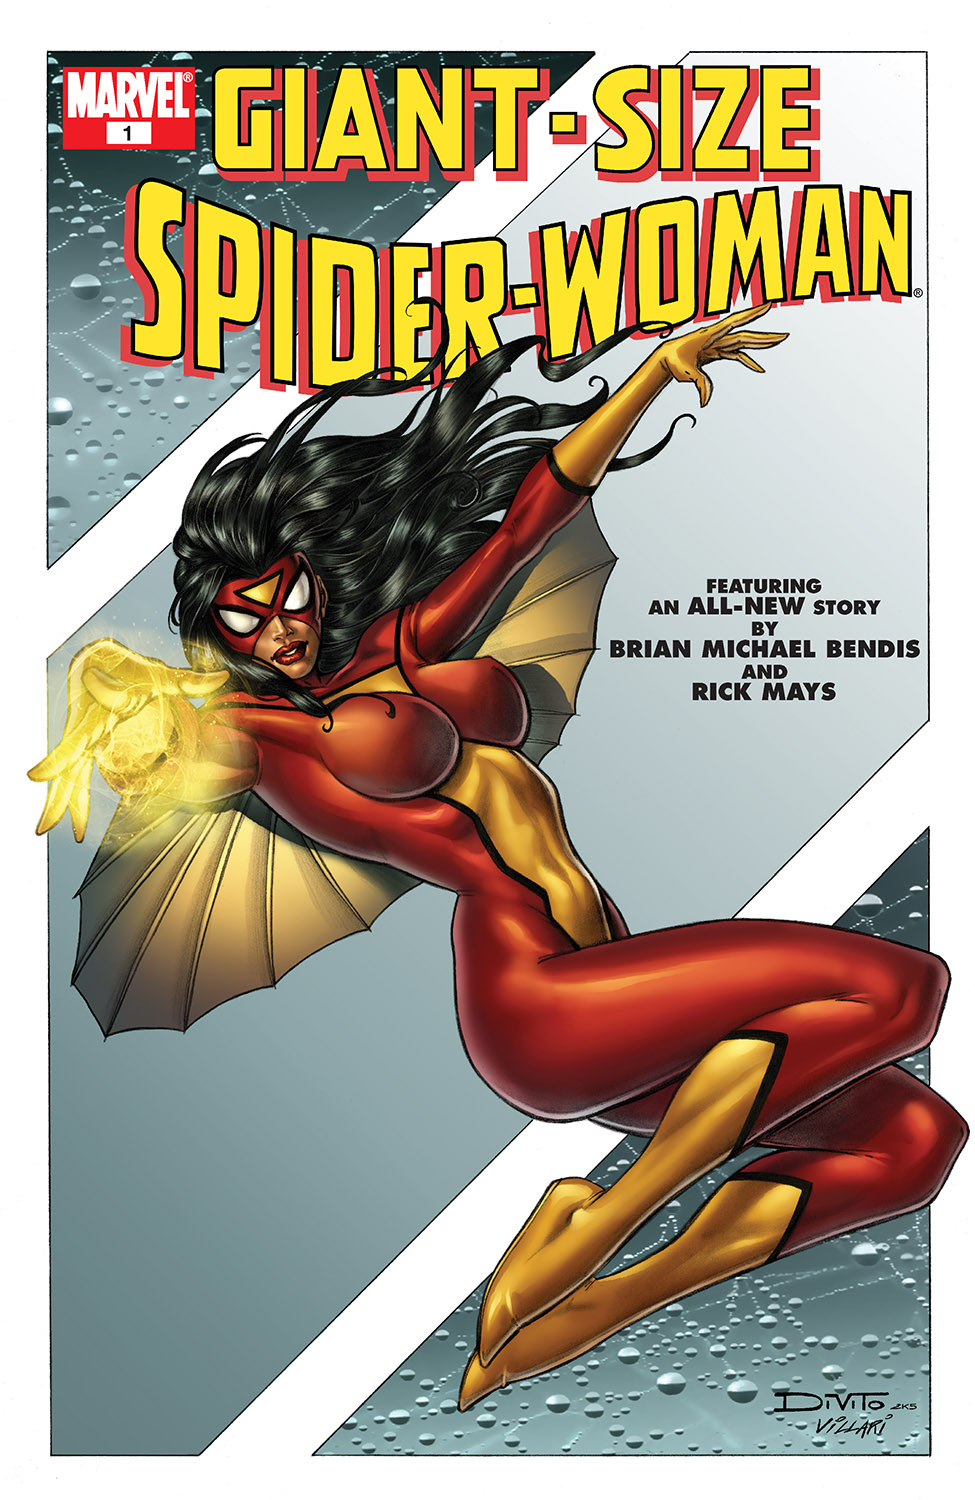 Giant Size Spider-Woman (2005) #1